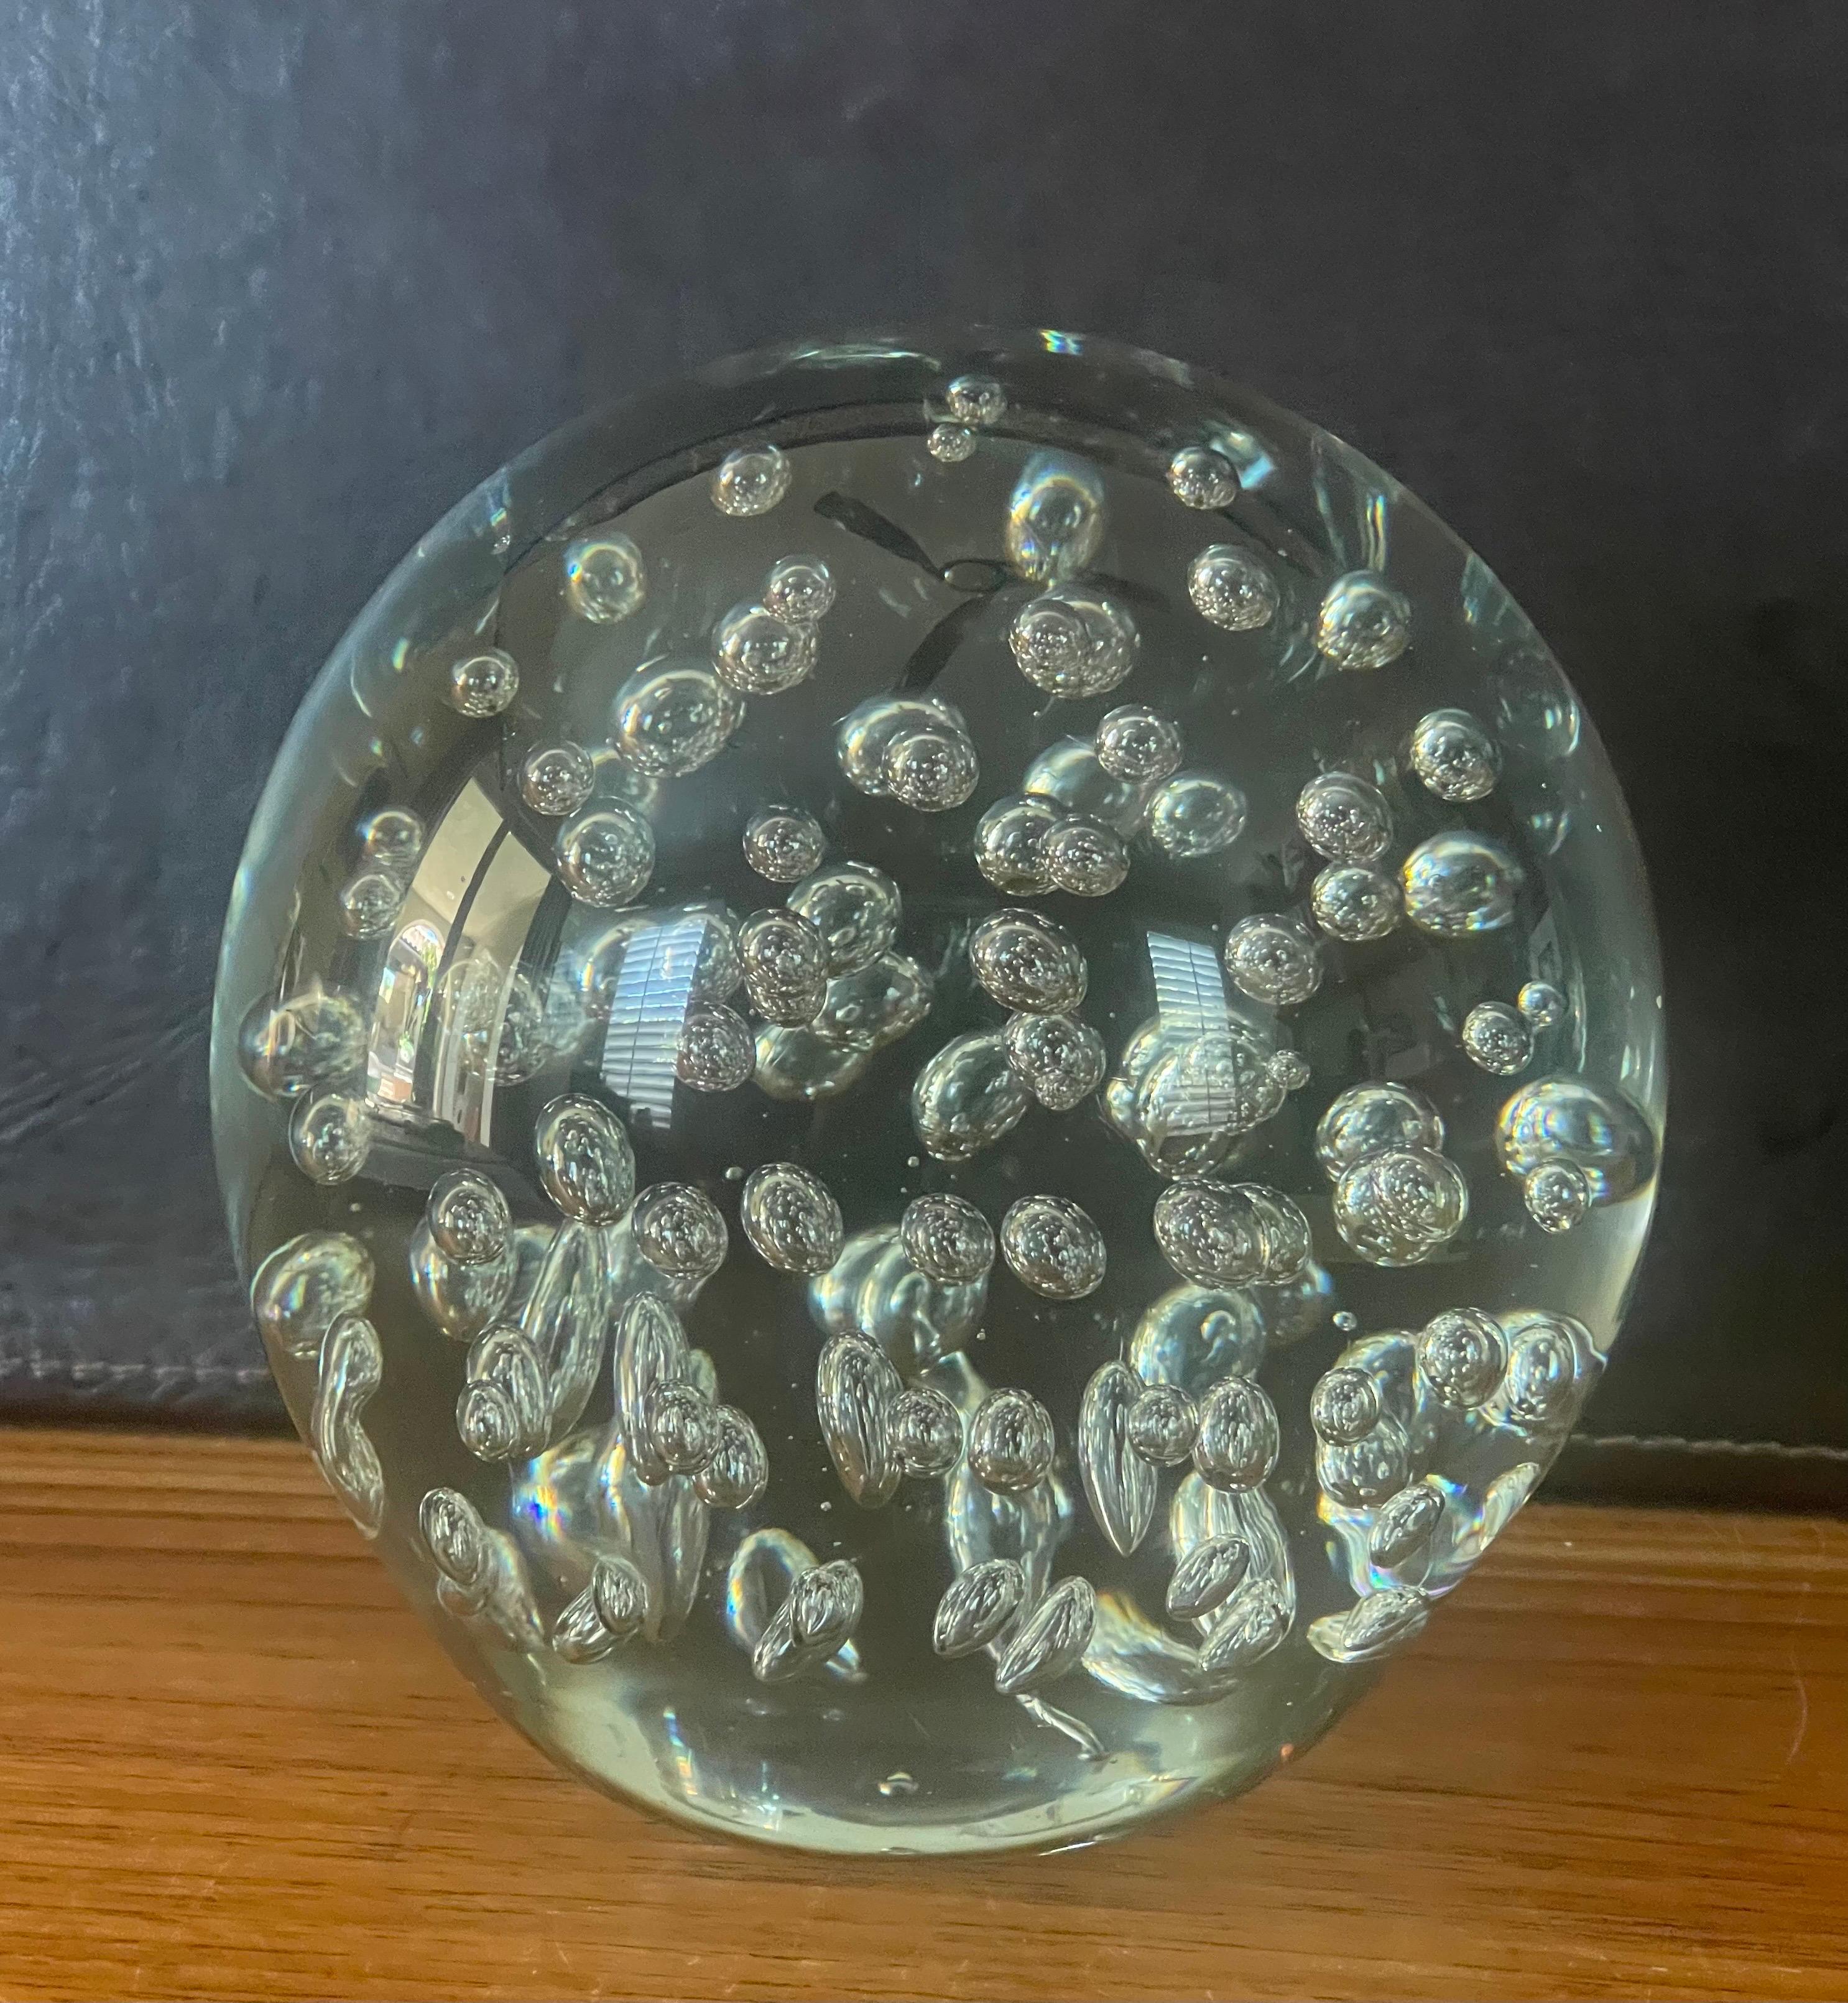 Large Clear Art Glass Orb Sculpture or Paperweight with Bubbles For Sale 1